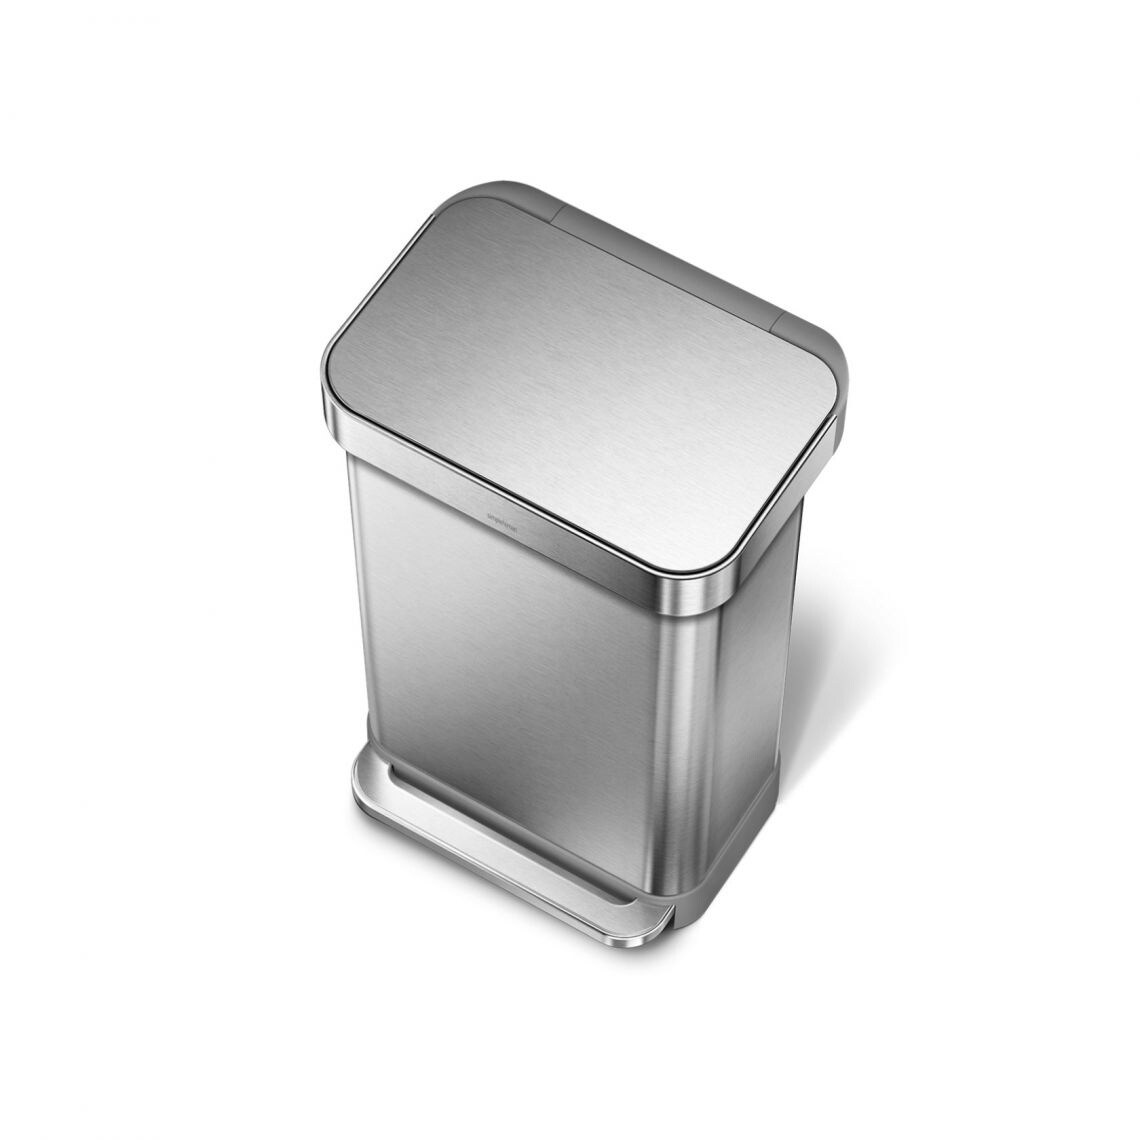 https://ak1.ostkcdn.com/images/products/10208080/simplehuman-45-liter-Stainless-Steel-Rectangular-Step-Can-with-Liner-Pocket-d4a317a1-0193-4570-af1c-4df8bc3f1fc4.jpg